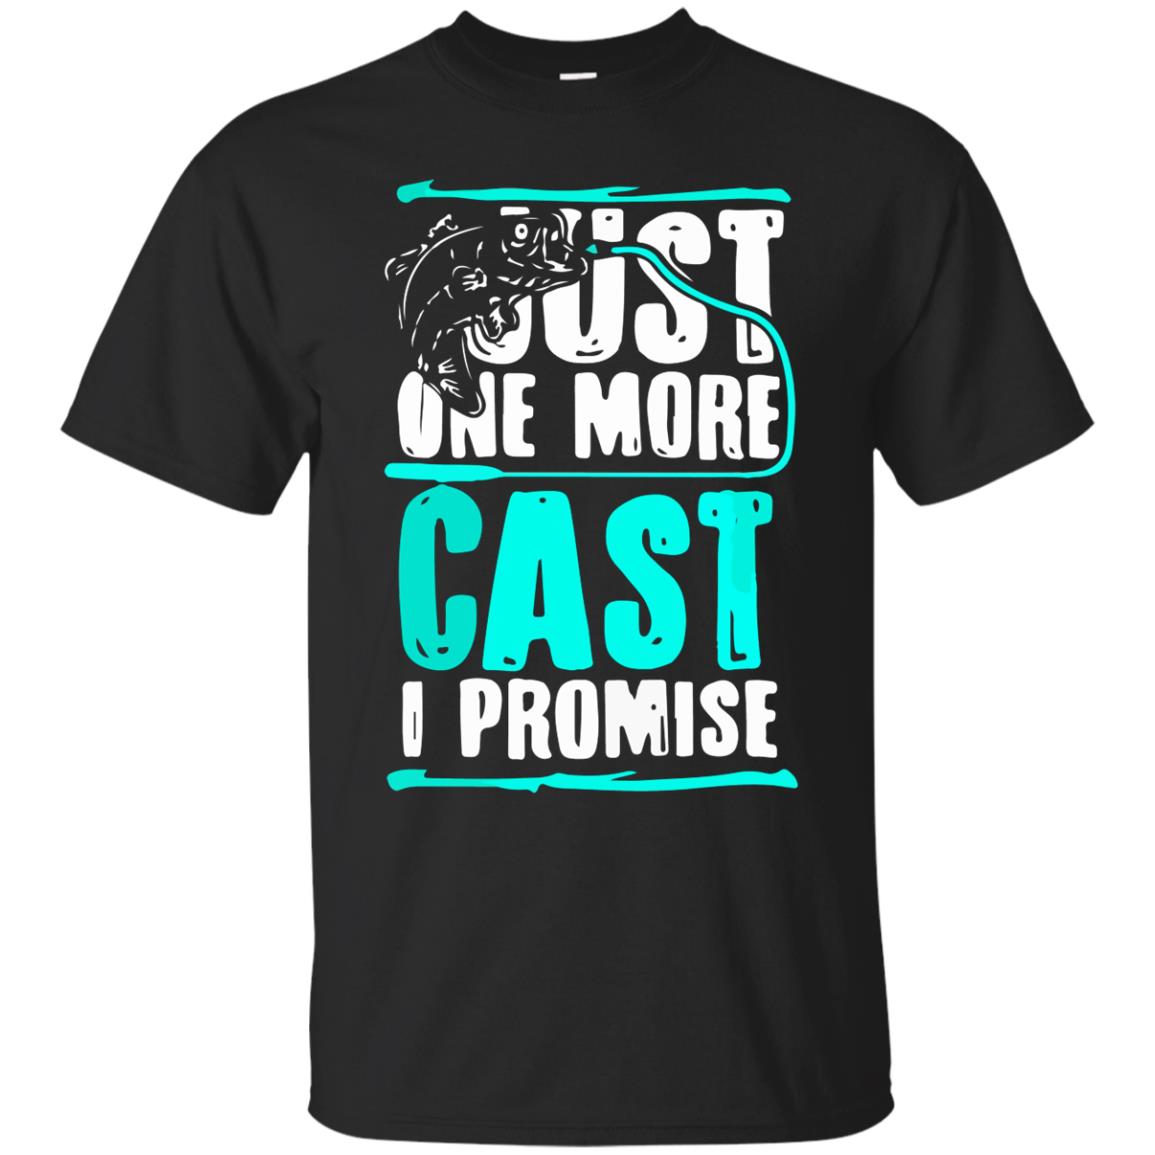 Just One More Cast I Promise Fishing Shirt